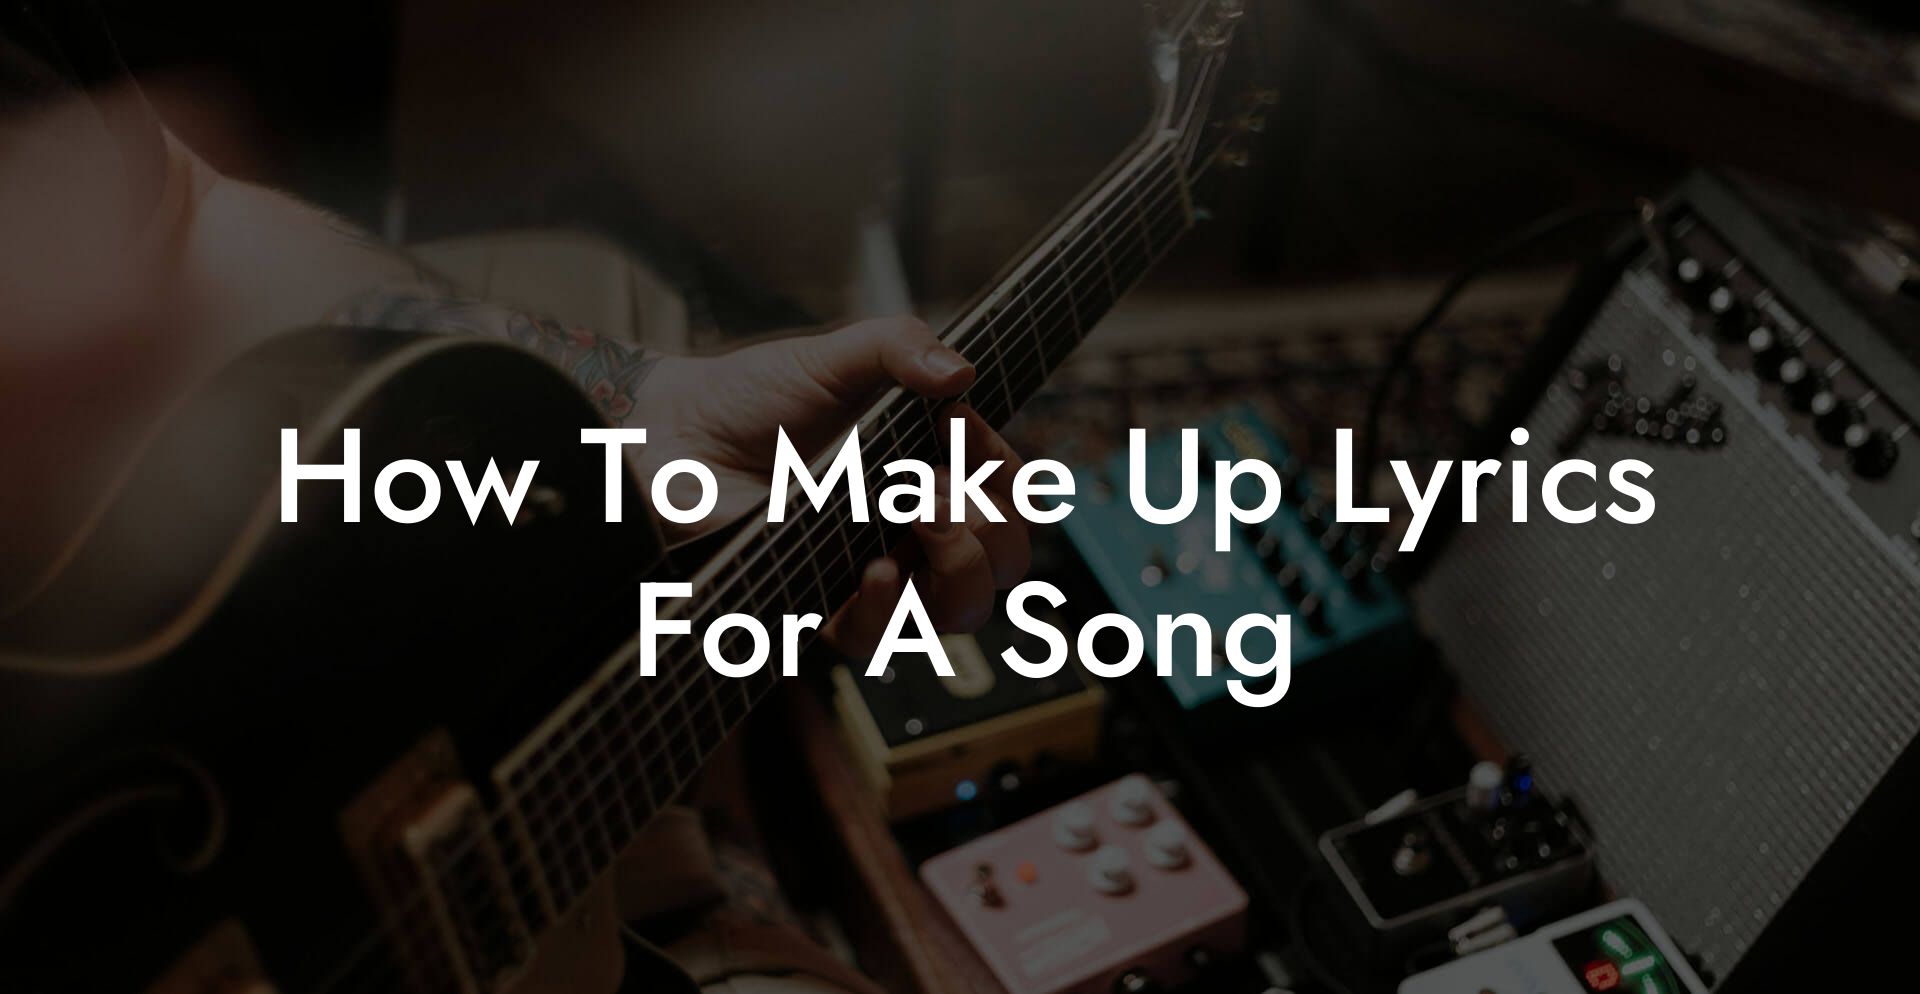 how to make up lyrics for a song lyric assistant